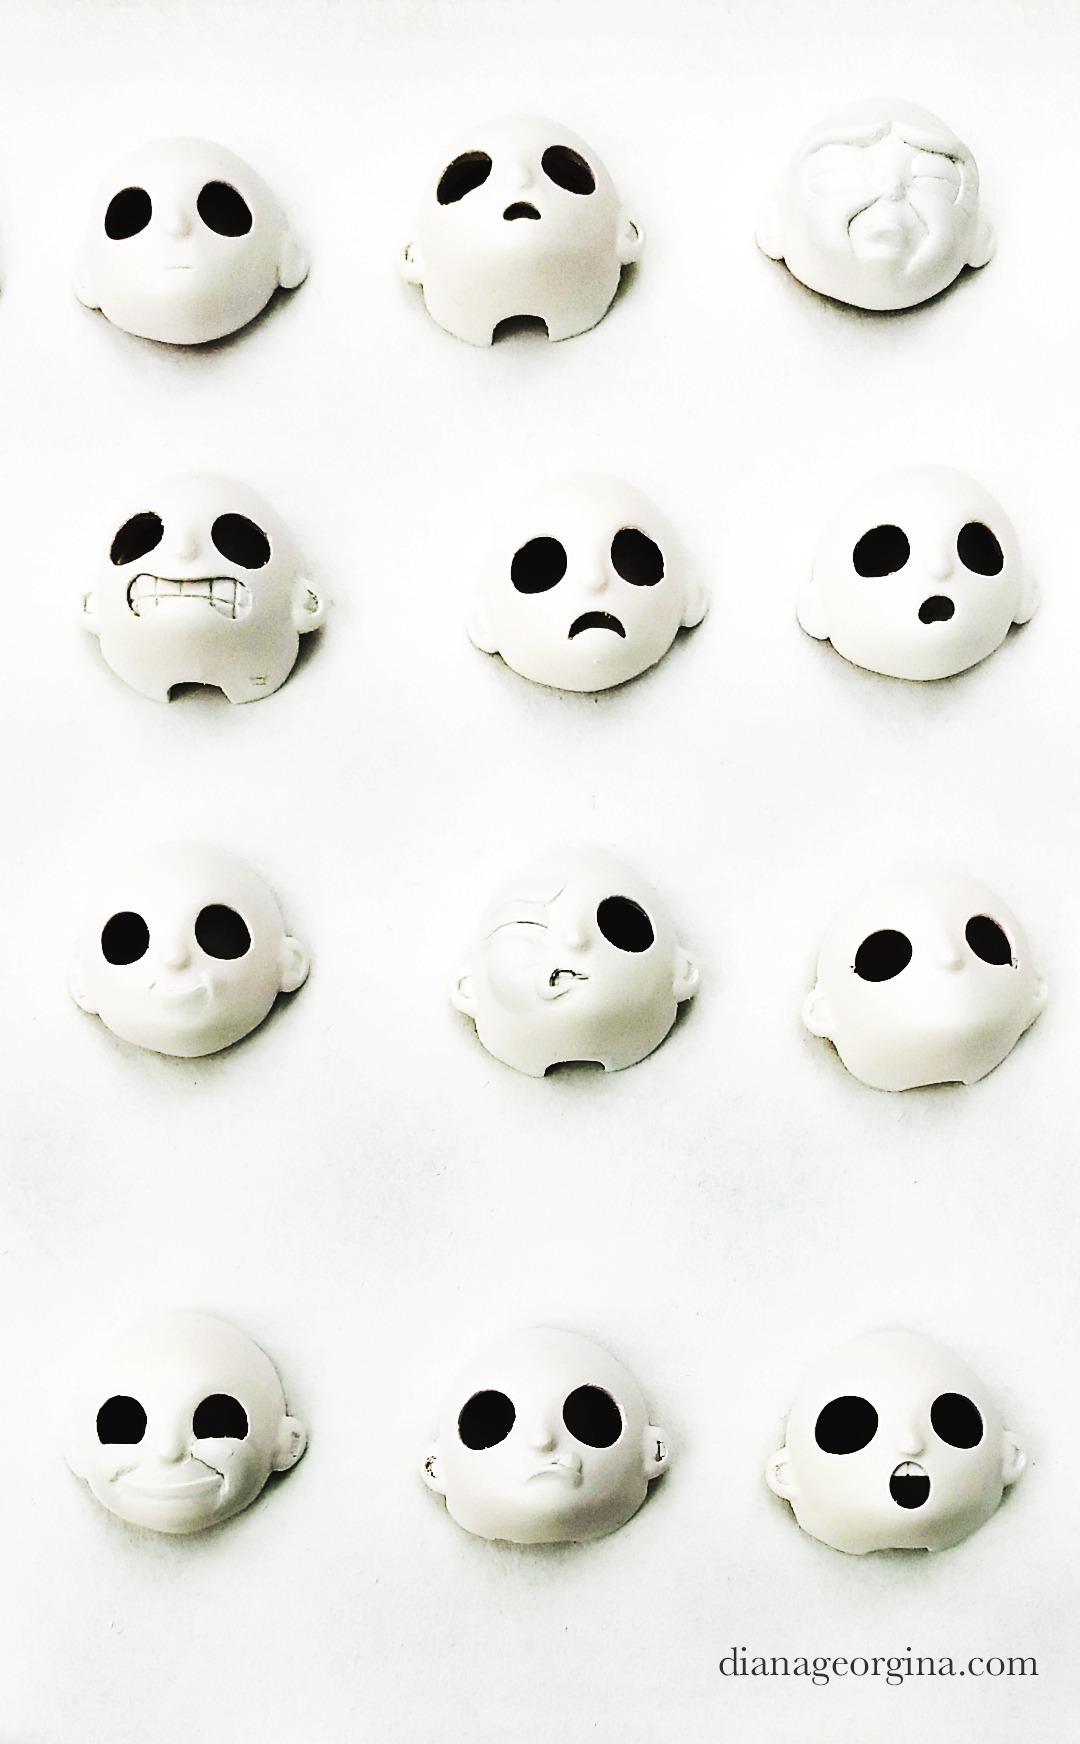 *Stop-motion faces making process.
Every time that I saw those little faces, I always listened in my mind the song sang by evil Boogie’s boys when Santa Claus is kidnapped by them in the movie ‘The nightmare before Christmas’.
🎶Kidnap the Sandy...